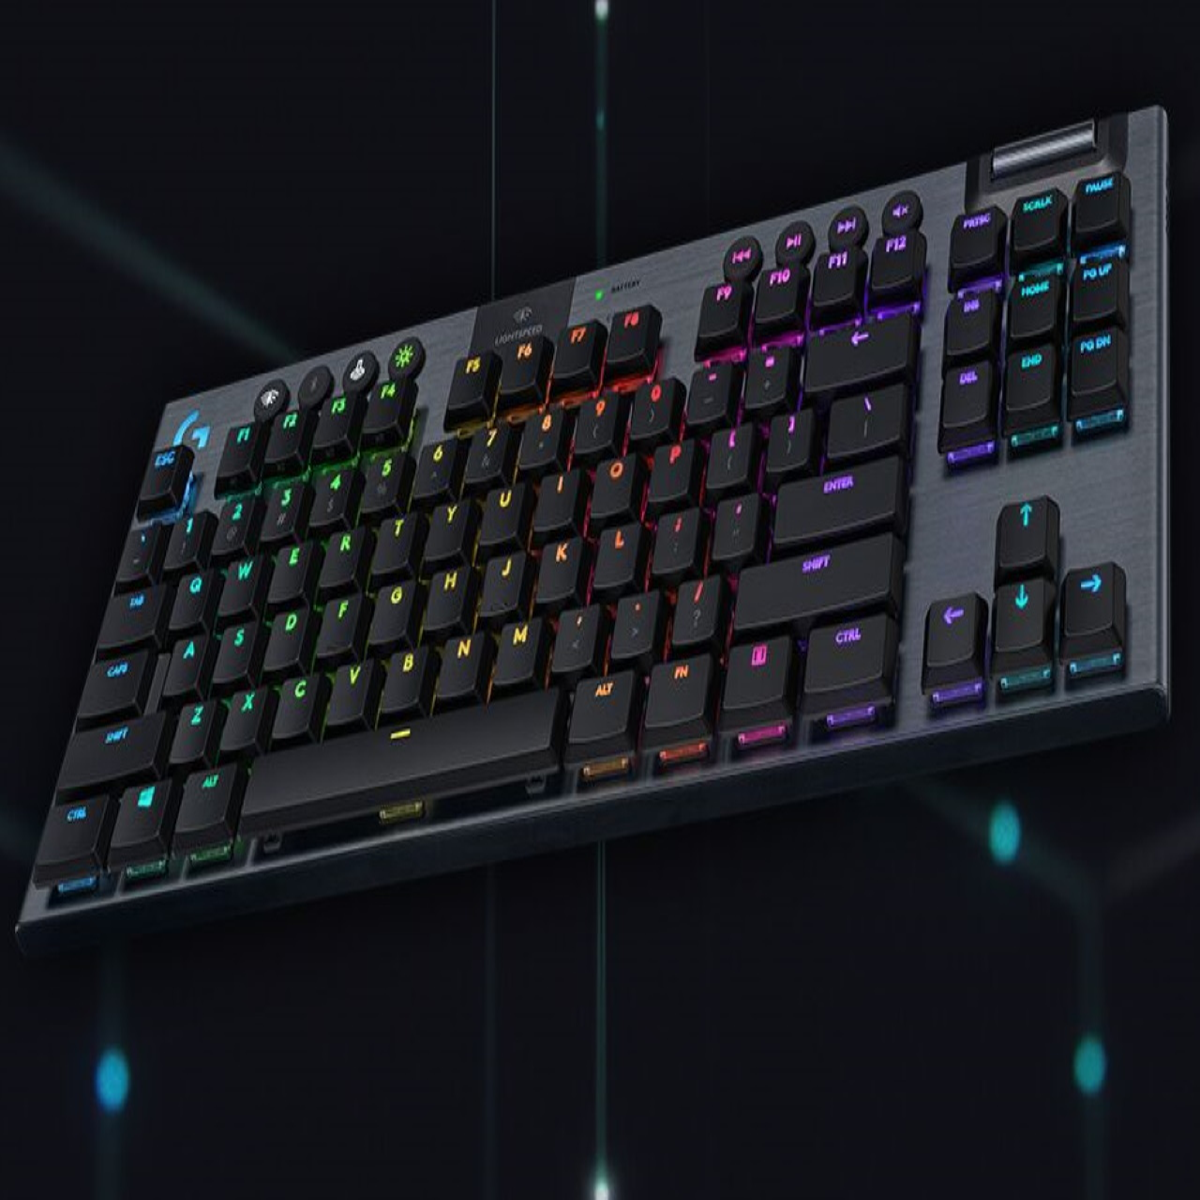 Logitech G Introduces G915 TKL, a More Compact Tenkeyless Gaming